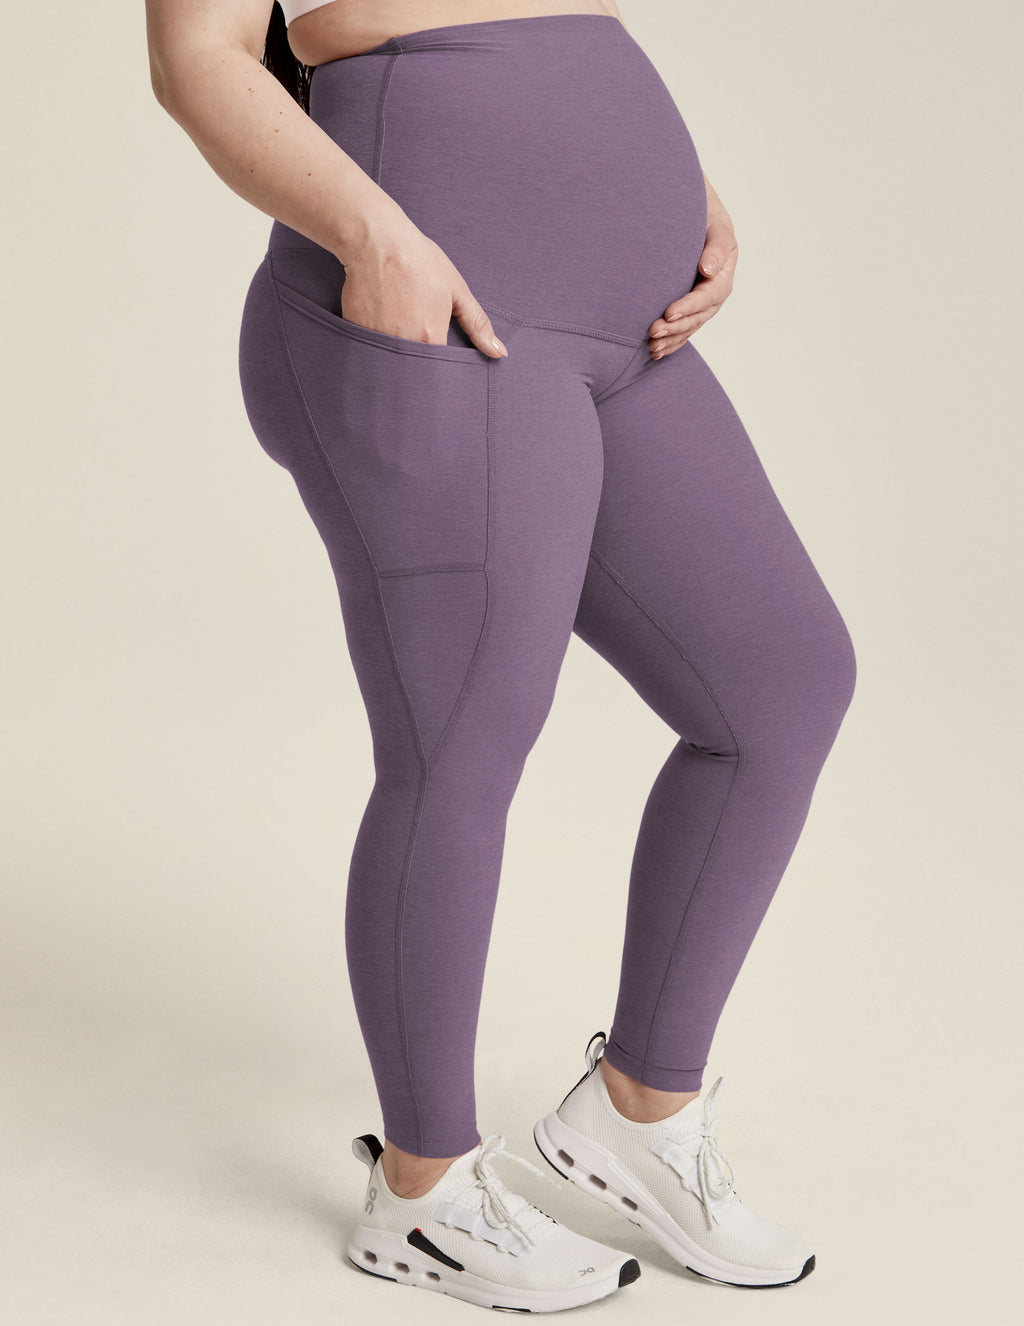 V VOCNI Maternity Leggings Mesh Yoga Pants with Pockets Over The Belly  Stretch Workout Leggings Running Pregnancy Tights